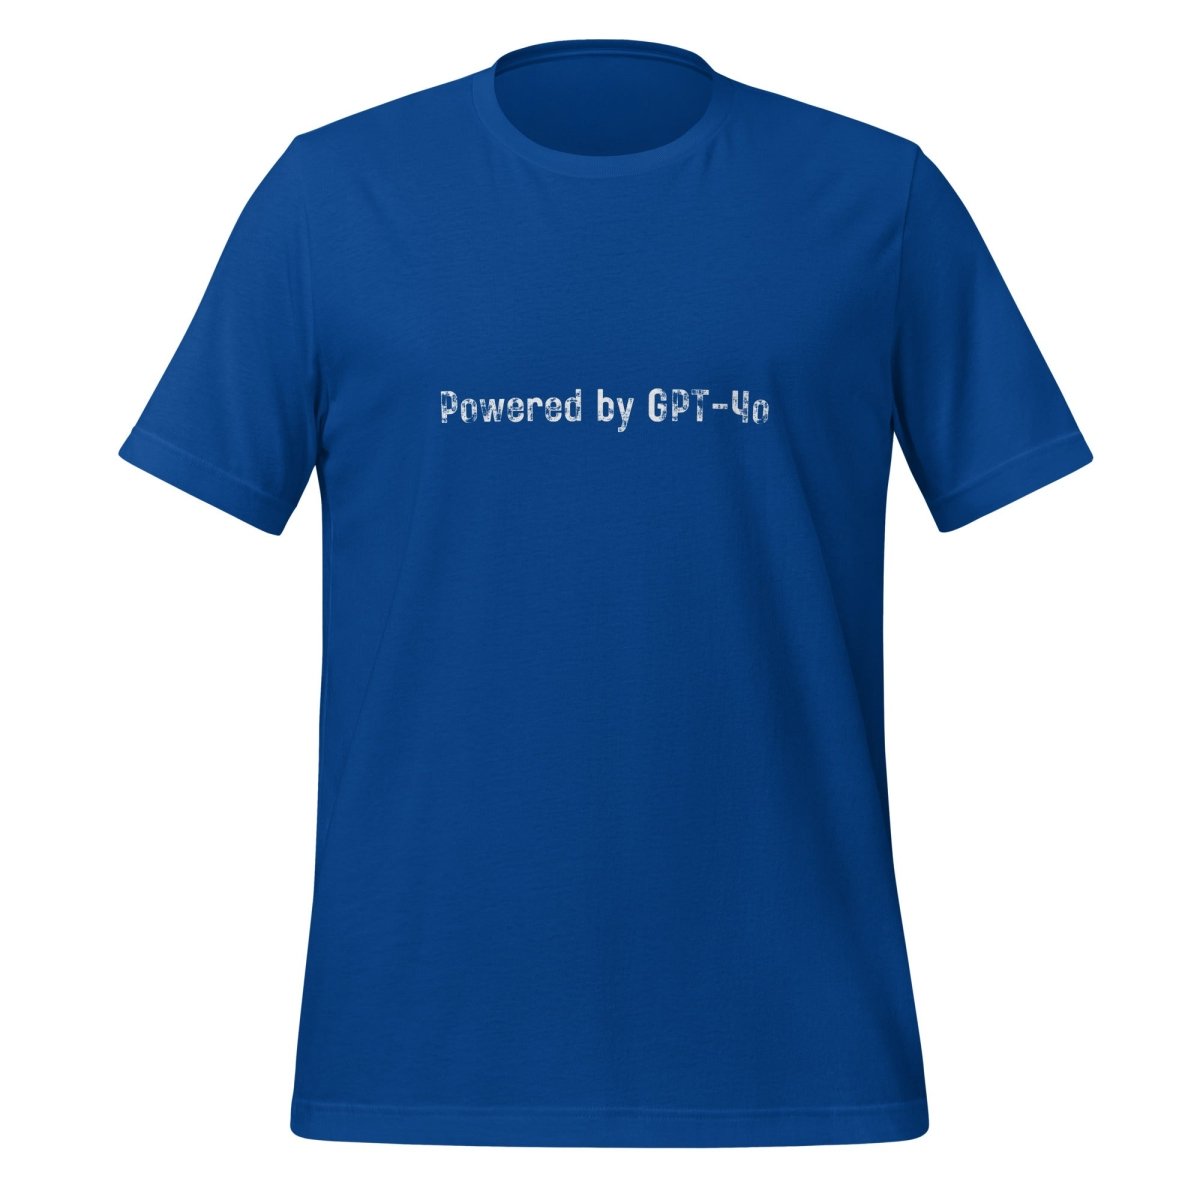 Powered by GPT - 4o T - Shirt 2 (unisex) - True Royal - AI Store